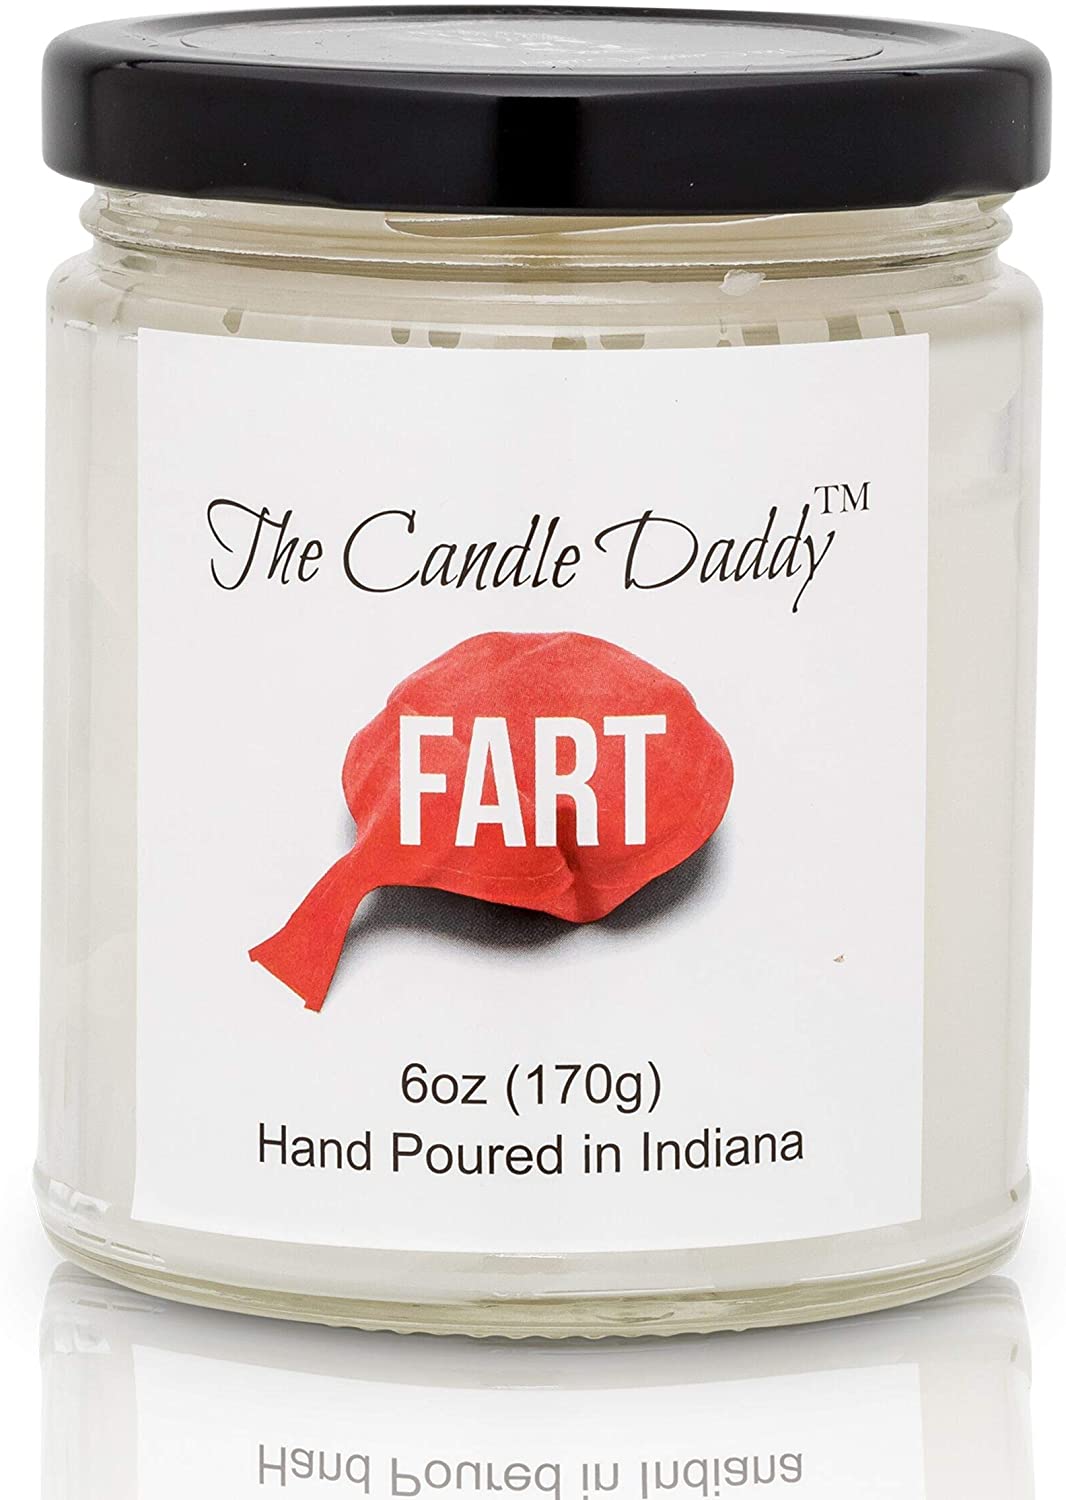 Fart Scented Candle - Smells Terrible- 6 Ounce Jar Candle- Hand Poured in Indiana